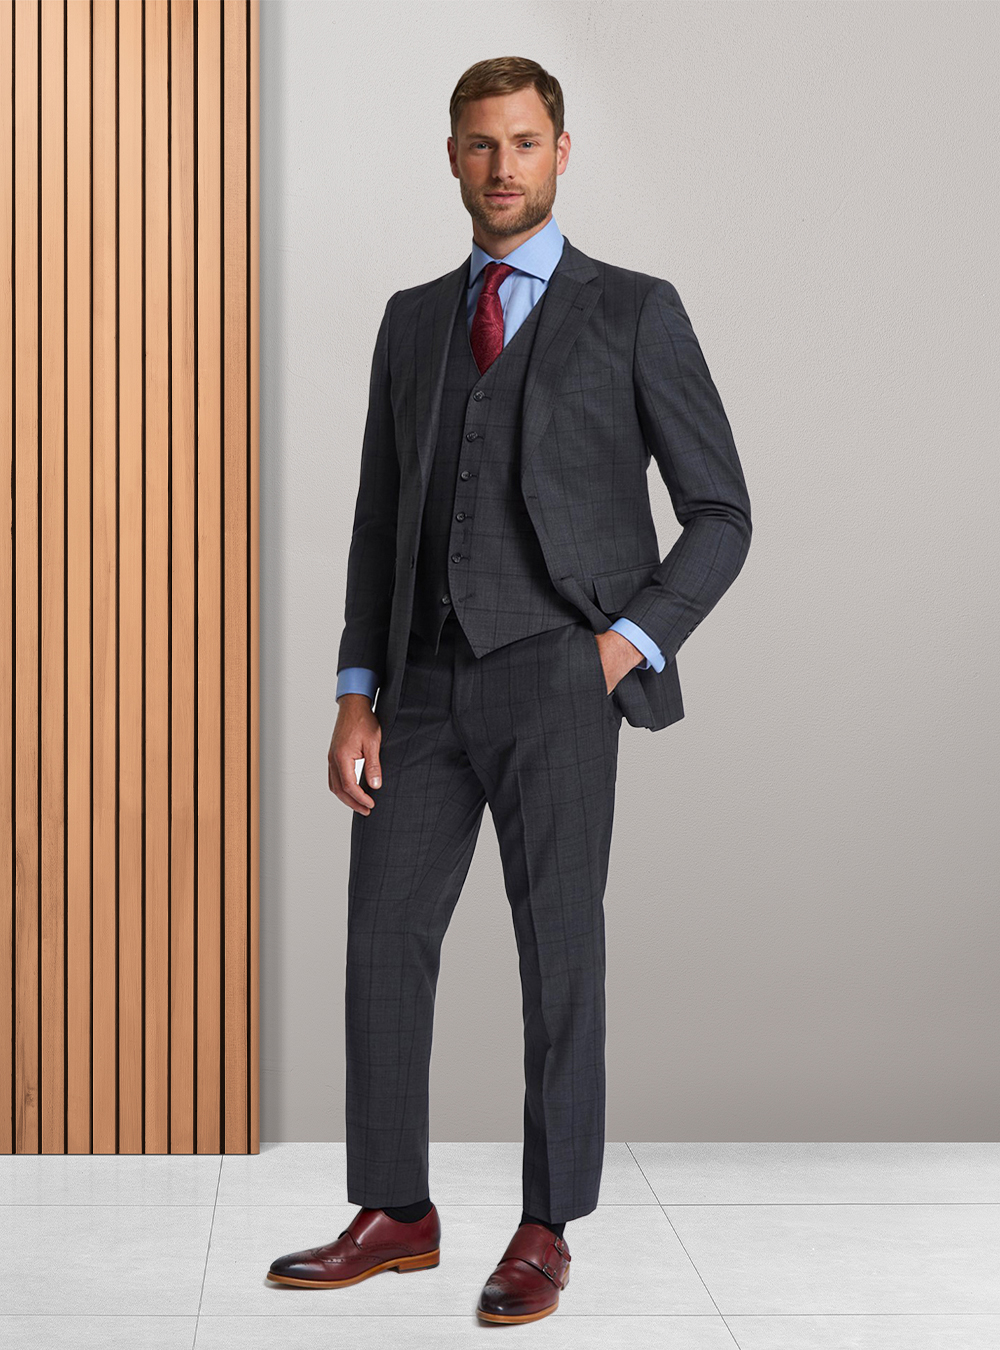 Charcoal windowpane three-piece suit, blue dress shirt, red paisley tie and burgundy double monk straps